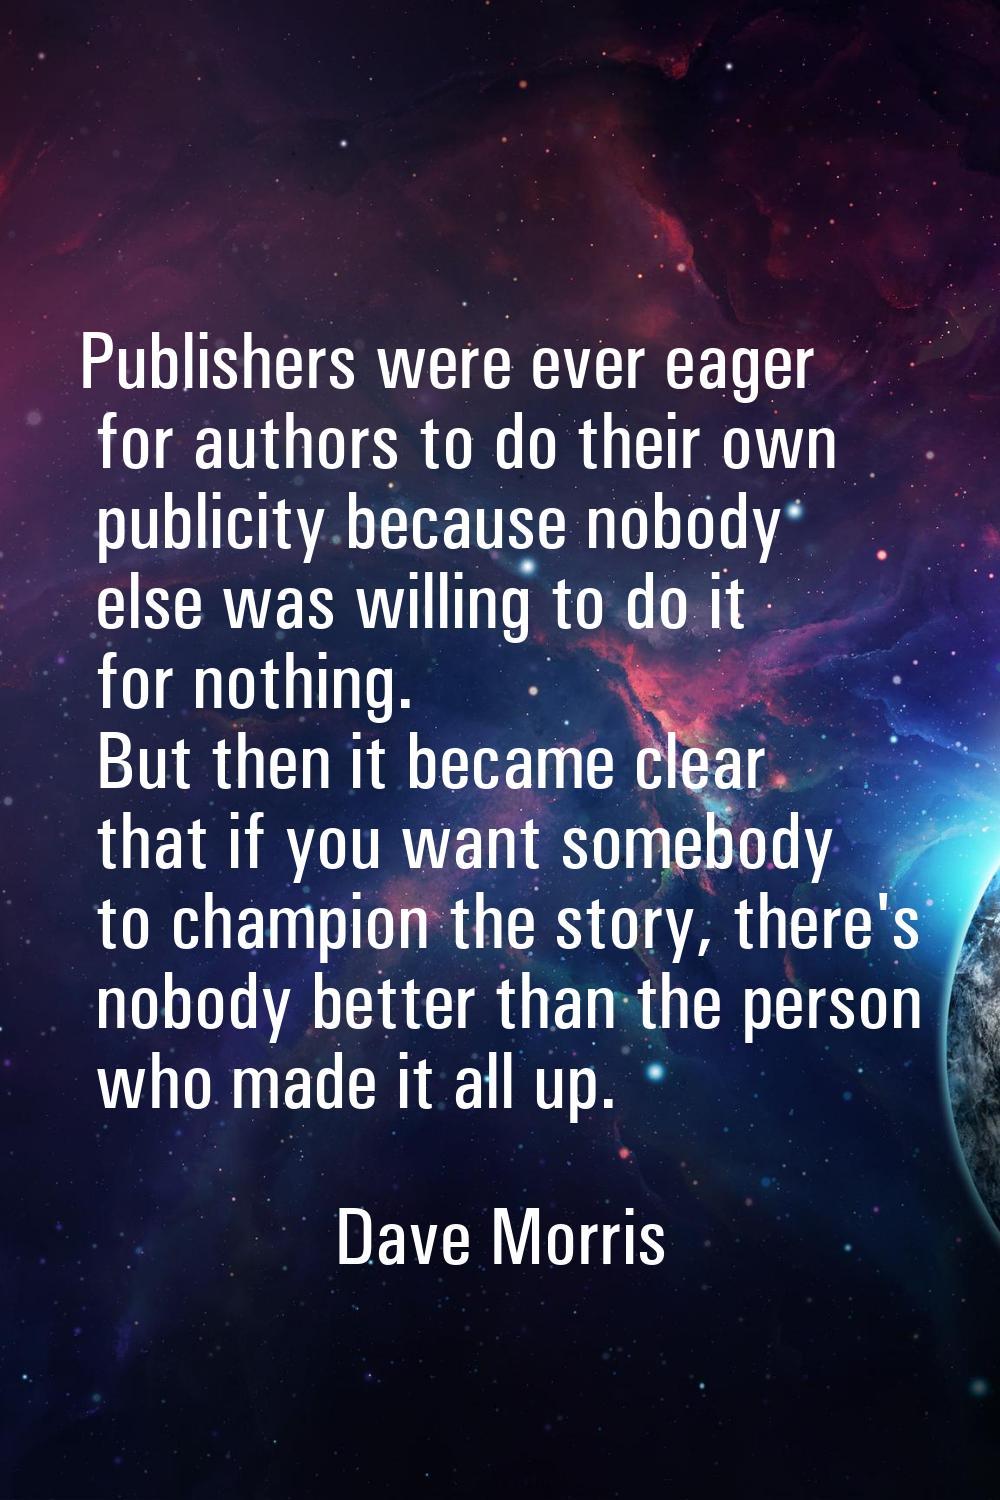 Publishers were ever eager for authors to do their own publicity because nobody else was willing to